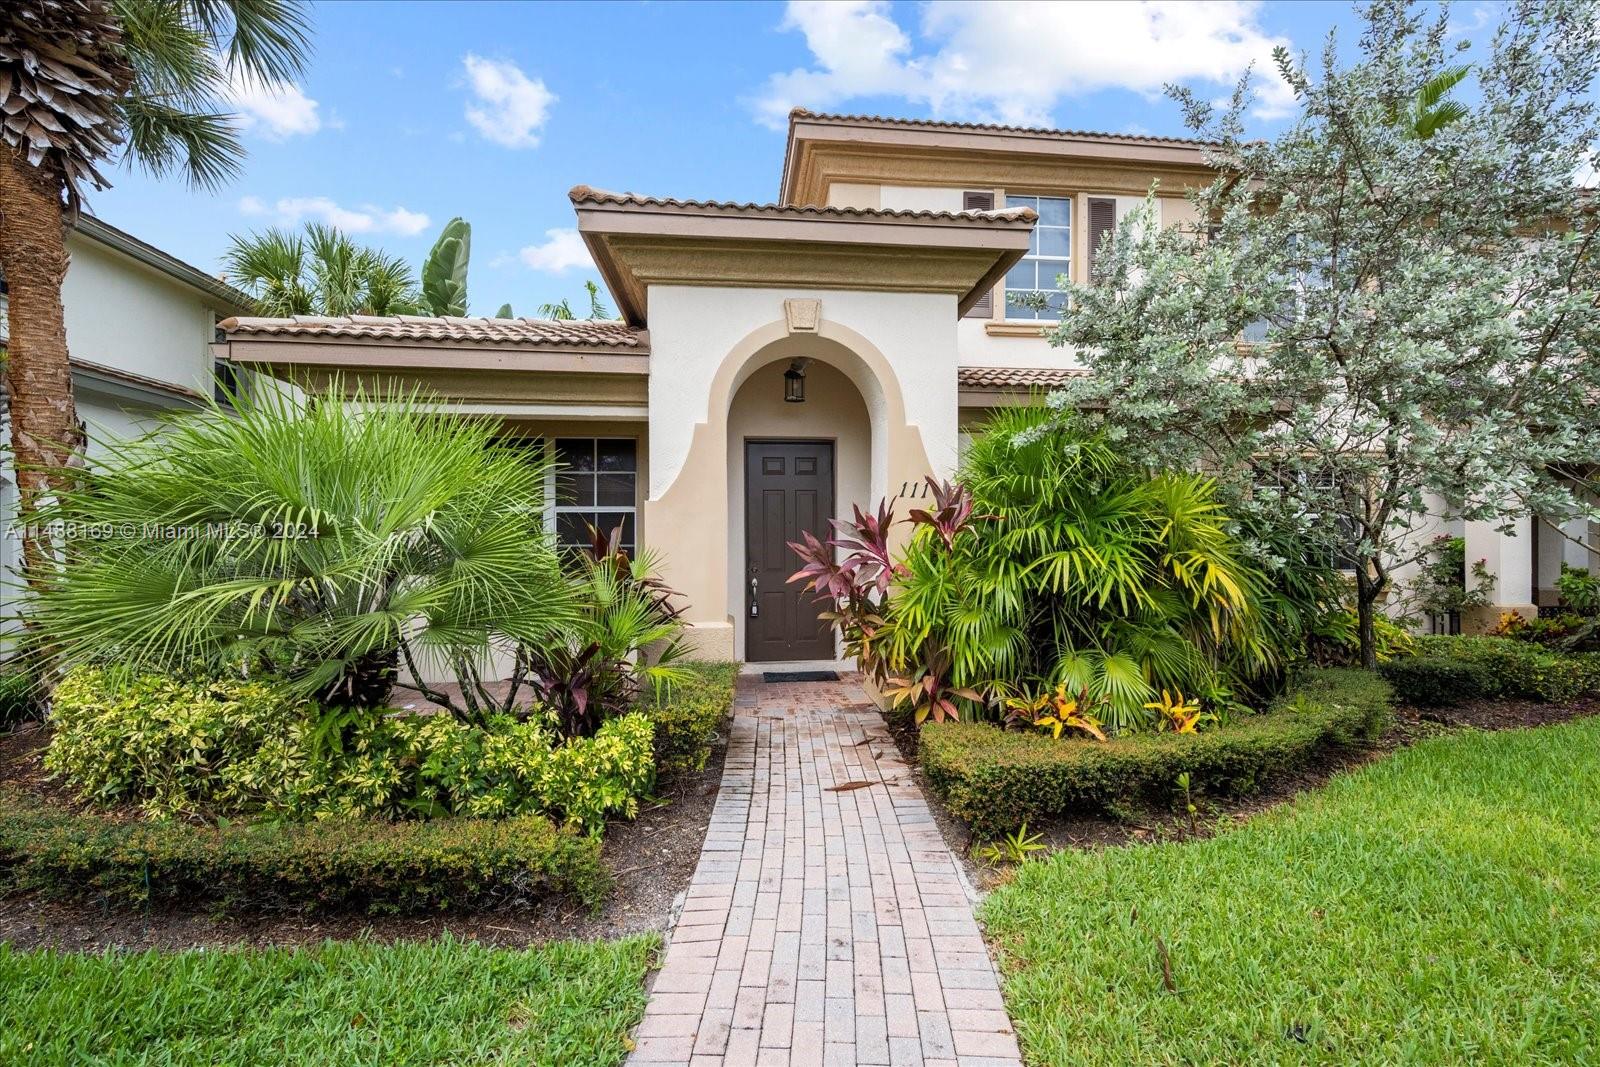 Property for Sale at 111 Evergrene Pkwy Pkwy 111, Palm Beach Gardens, Palm Beach County, Florida - Bedrooms: 3 
Bathrooms: 3  - $550,000